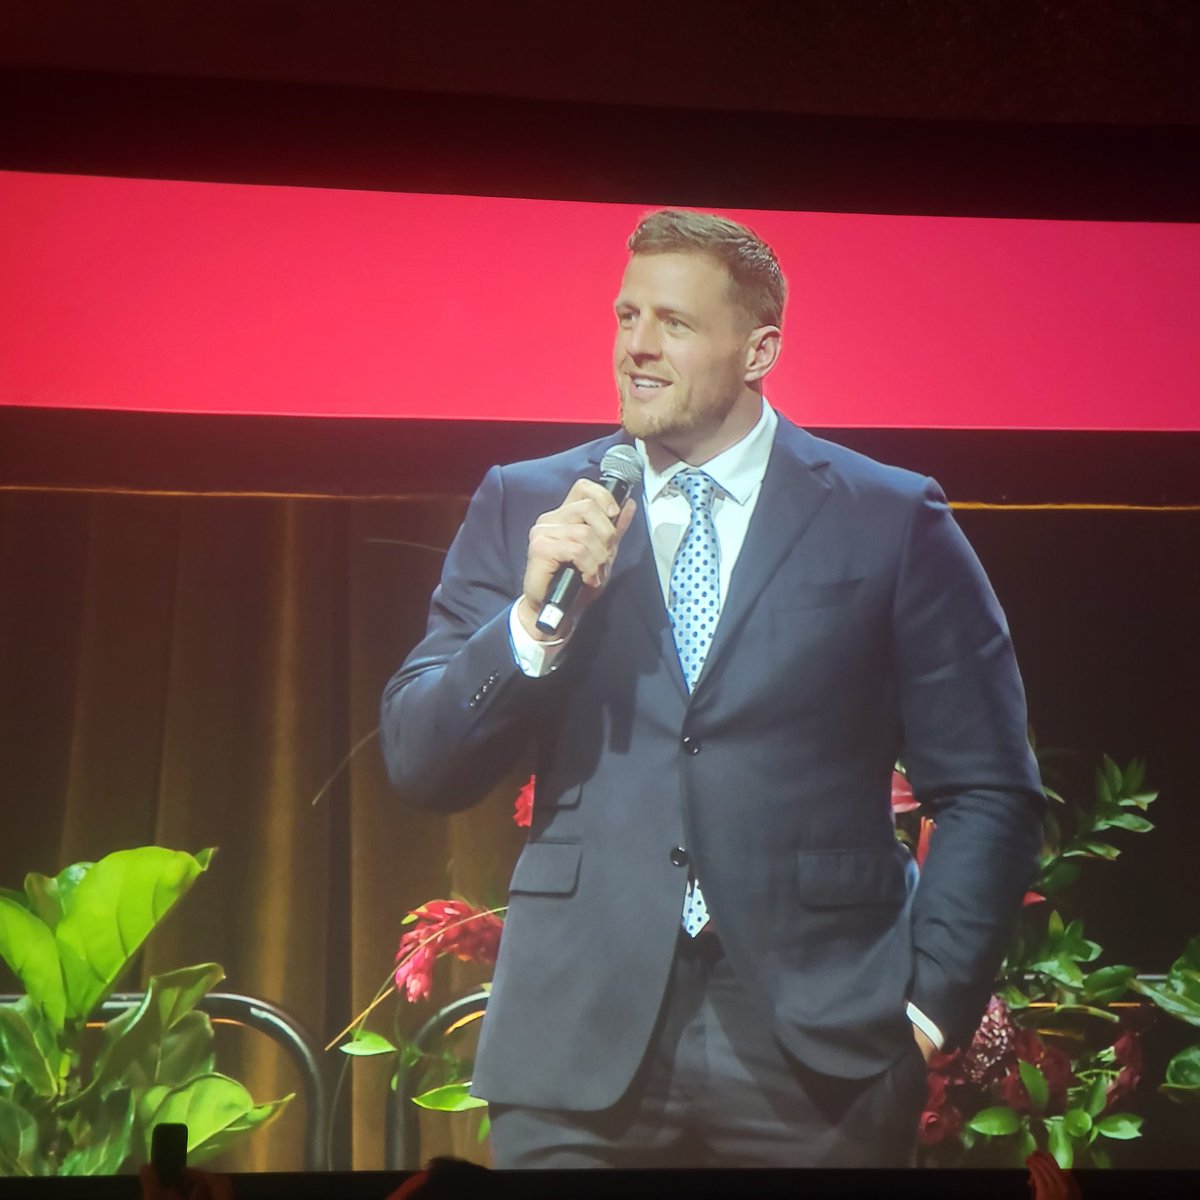 Words of wisdom from @JJWatt last night @HEBexcellence awards dinner. Thank you for the inspiration and the validation. Dream Big, Work Hard! #DreamBig #WorkHard #Excellence #WeAreKHS